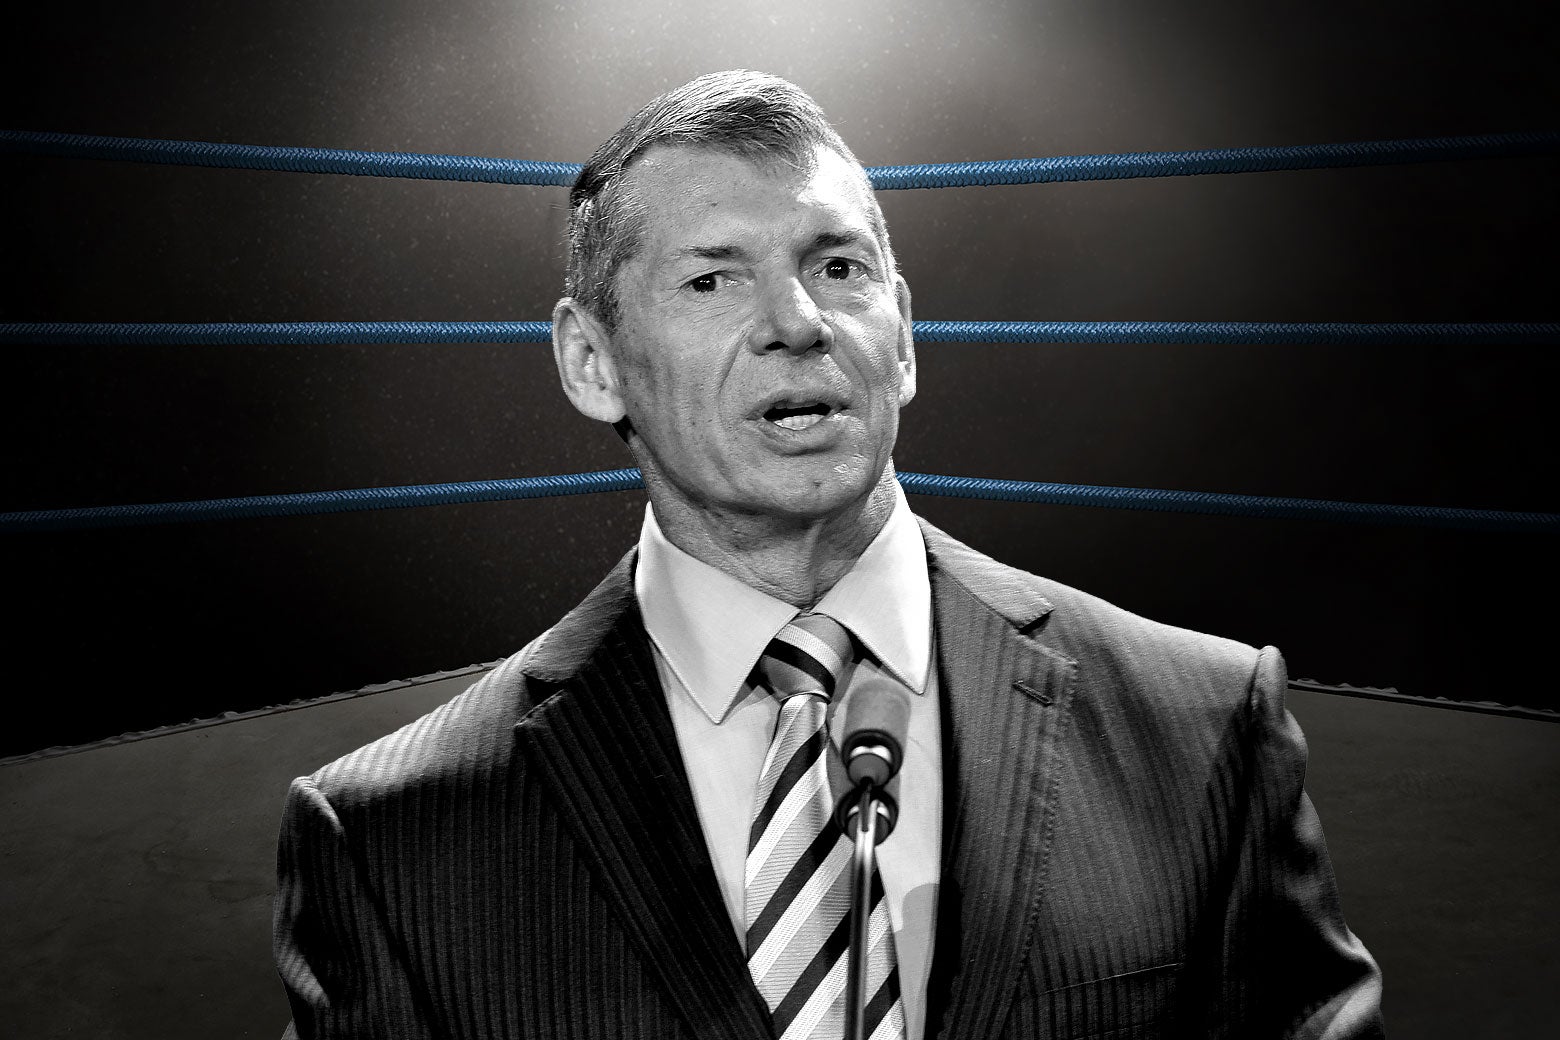 Black-and-white image of Vince McMahon wearing a pinstripe suit and standing behind a microphone in the center of a wrestling ring.